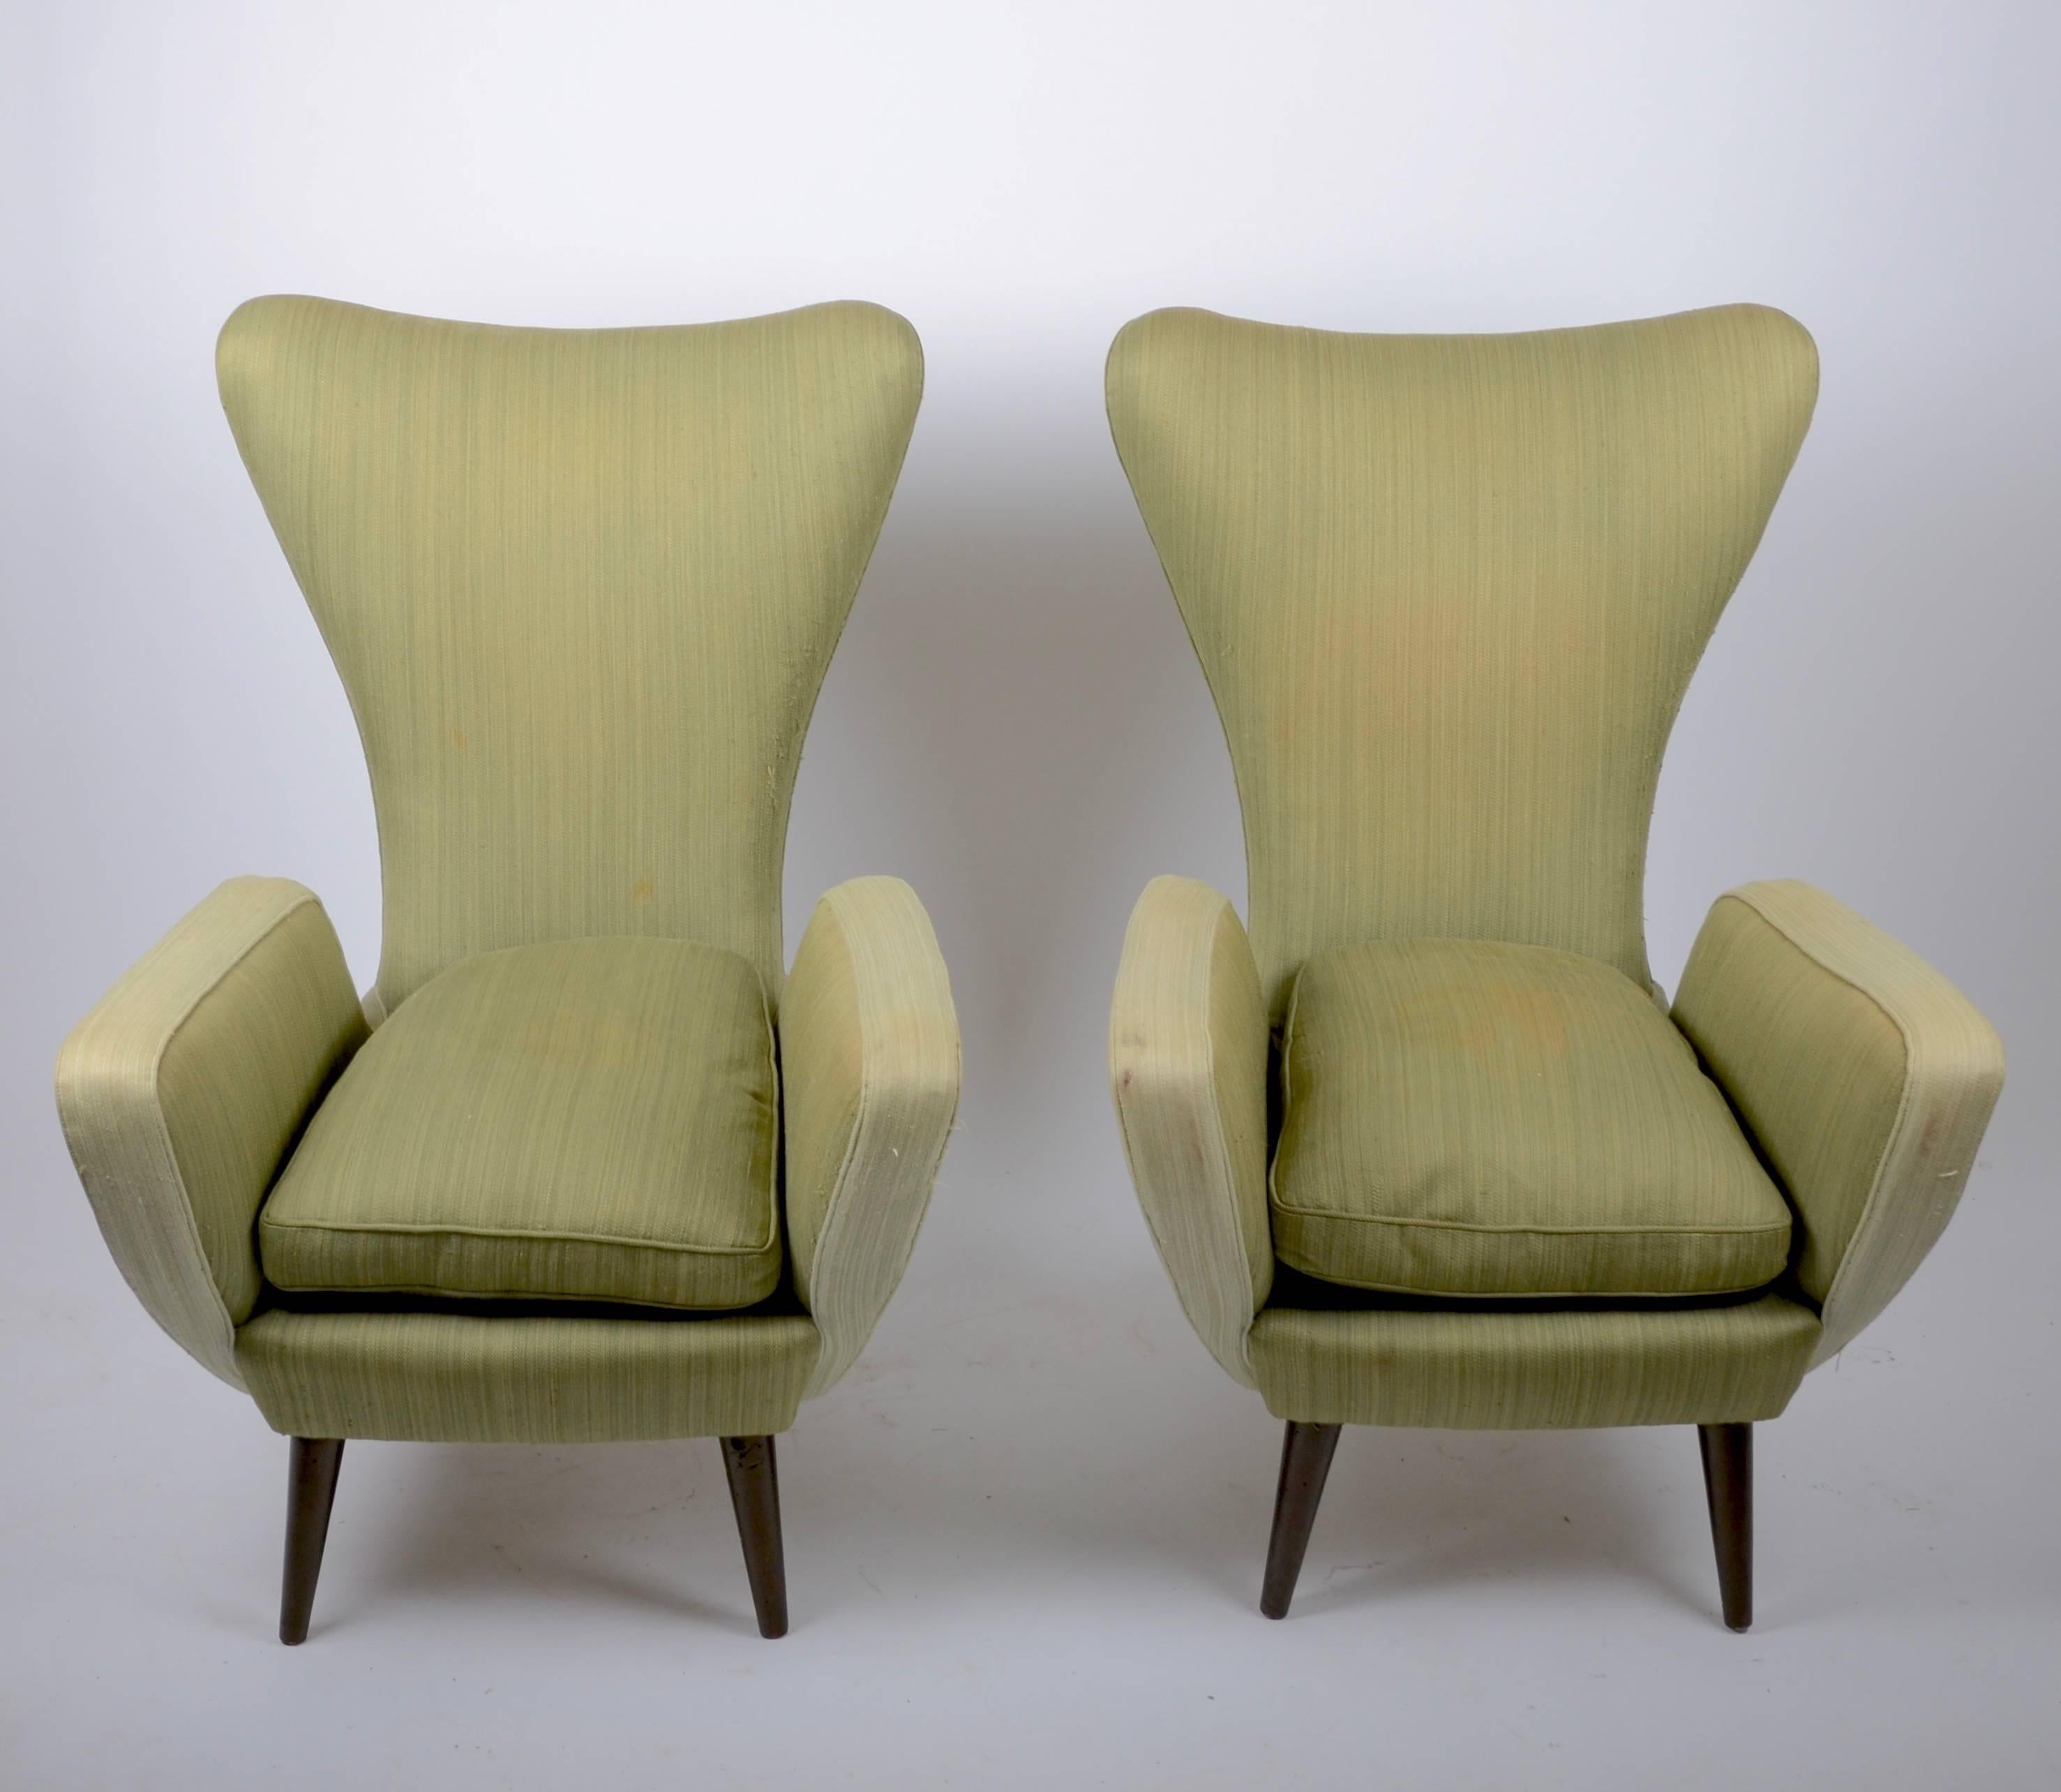 A pair of lounge chairs, Italian, 1950s. Wool fabric, in need of reupholstering.